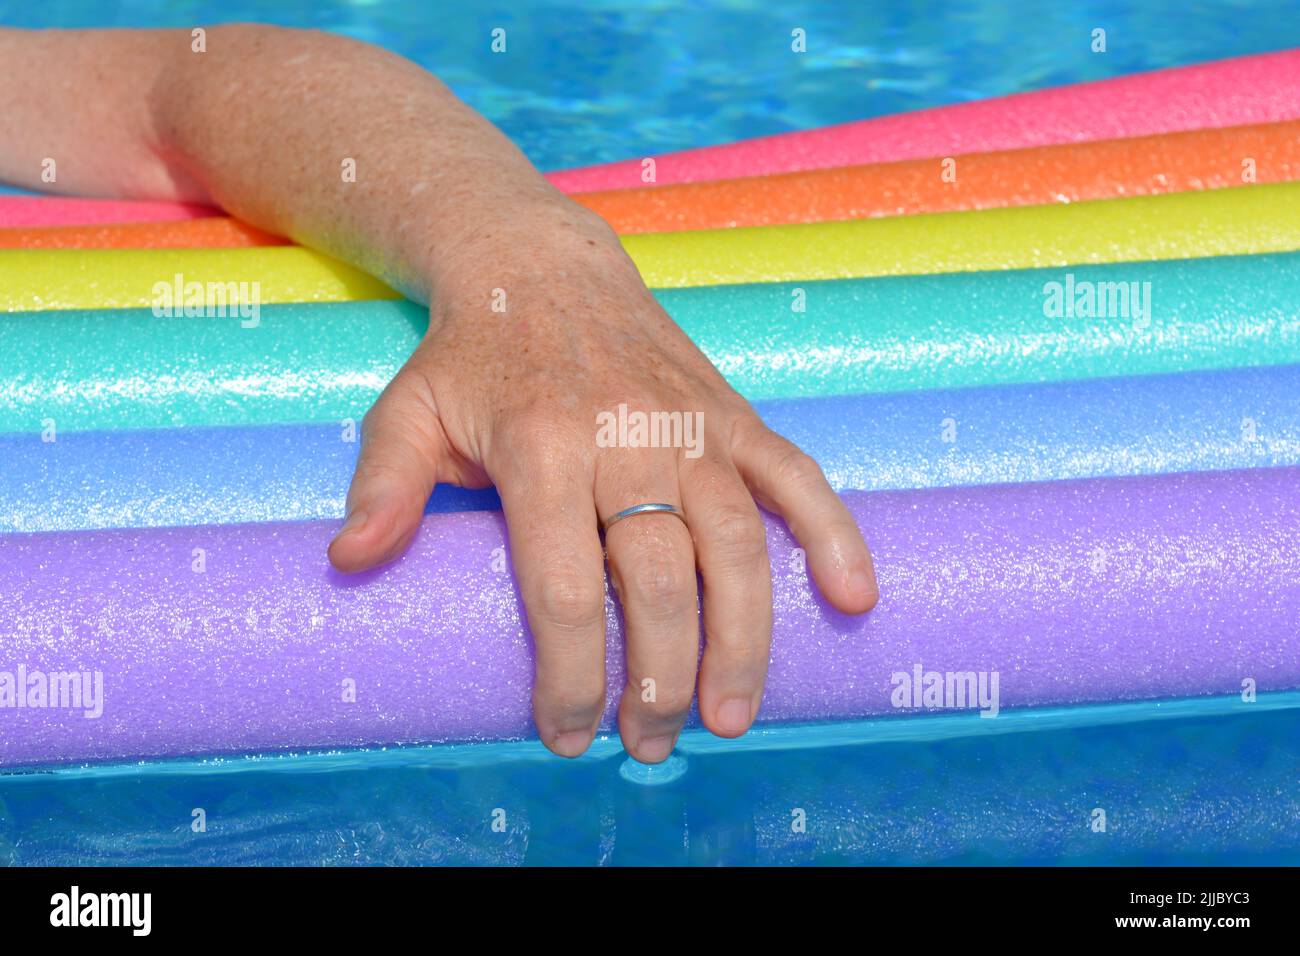 Woman's arm resting on rainbow coloured swim noodles floating in swimming pool Stock Photo